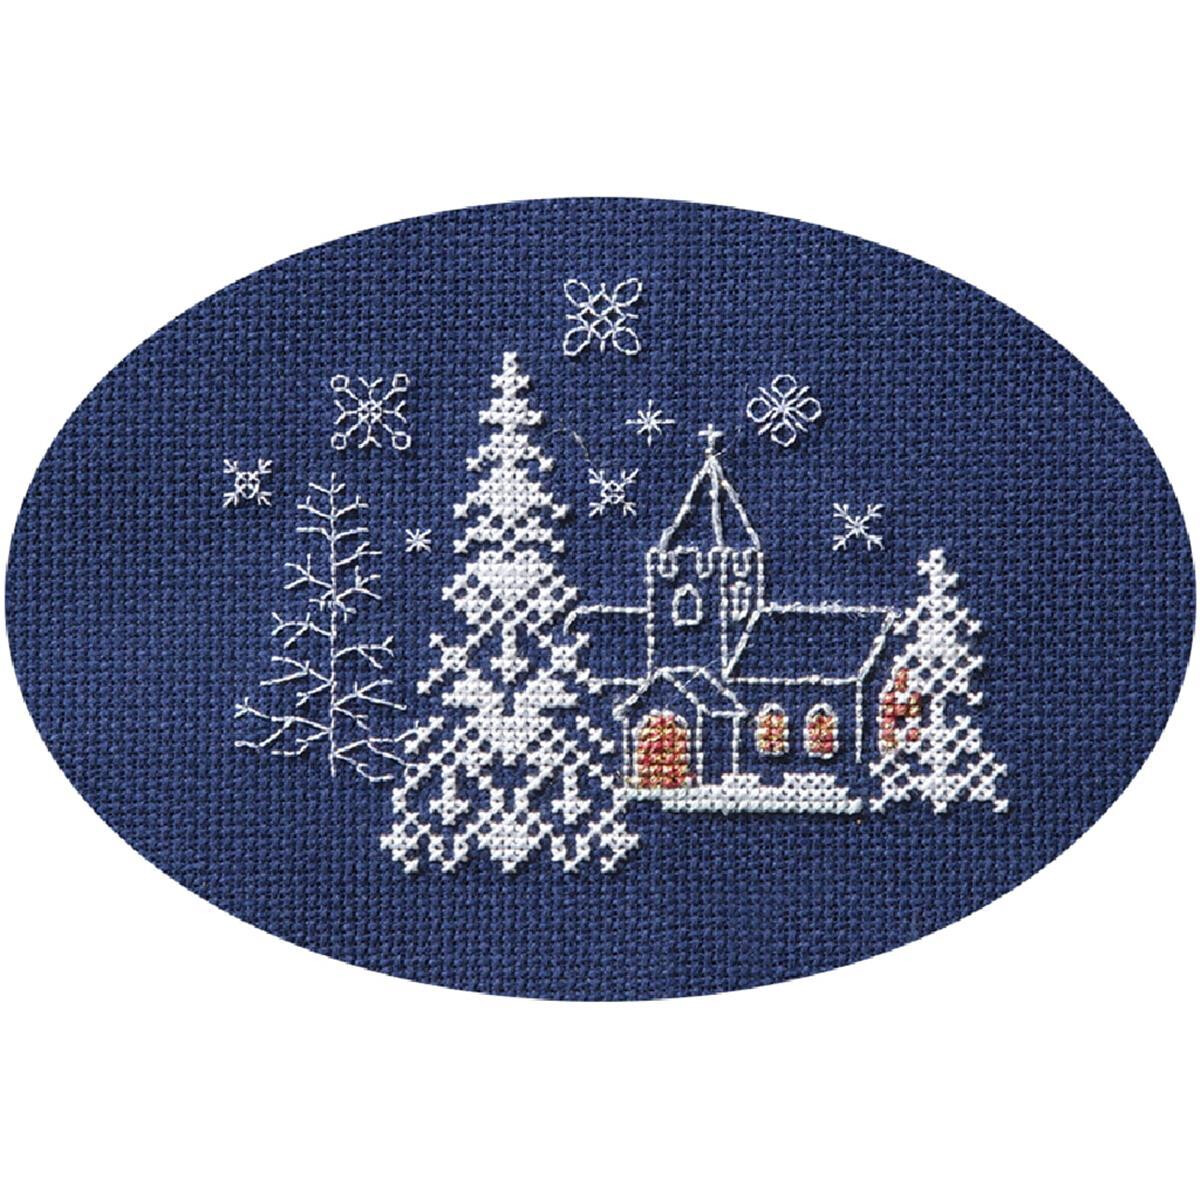 A detailed cross stitch scene on navy blue fabric depicts...